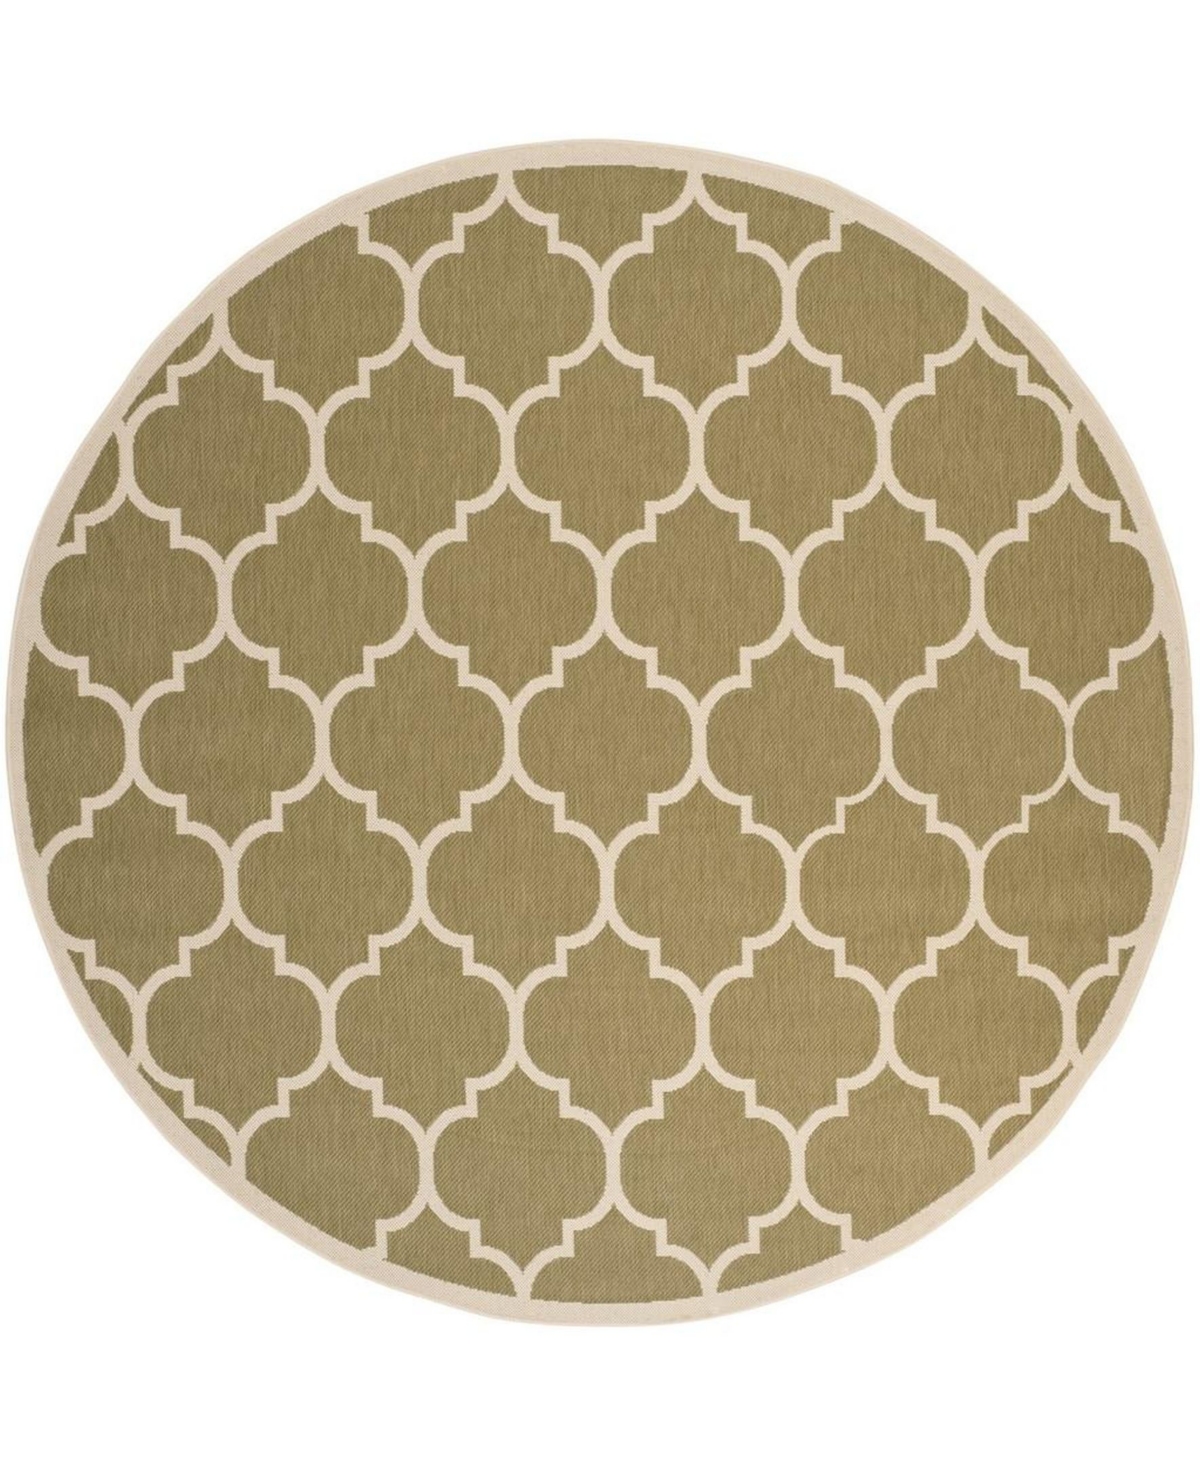 Safavieh Courtyard Cy6914 Green And Beige 7'10" X 7'10" Round Outdoor Area Rug